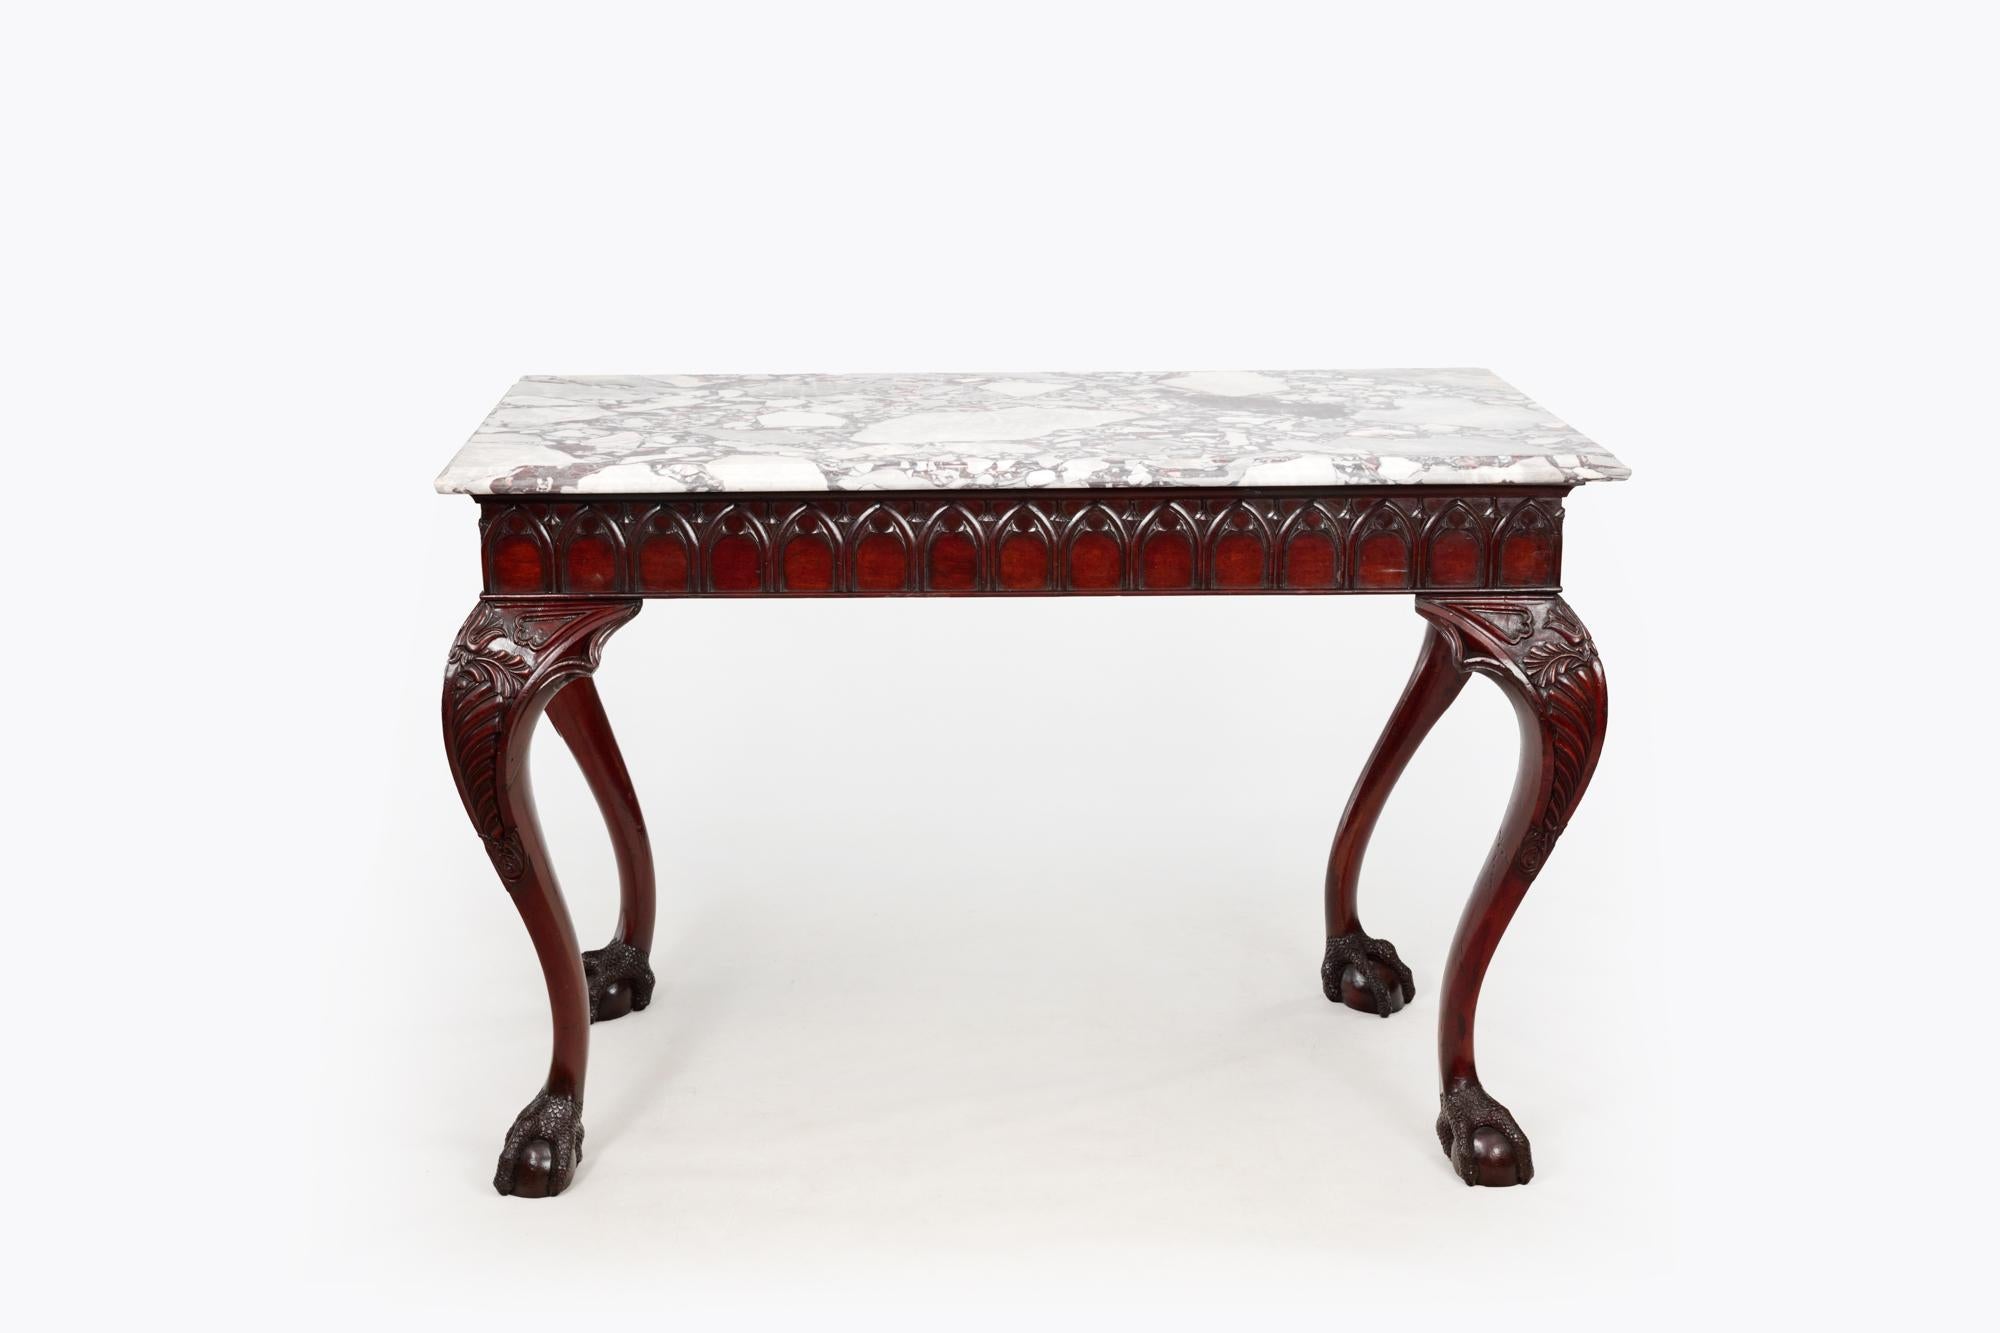 Early 19th Century mahogany Irish side table with marble top. The blind fretwork frieze with arch-style carvings wraps all four sides of the tabletop which is completed by a solid rectangular marble top. This piece stands on four highly carved